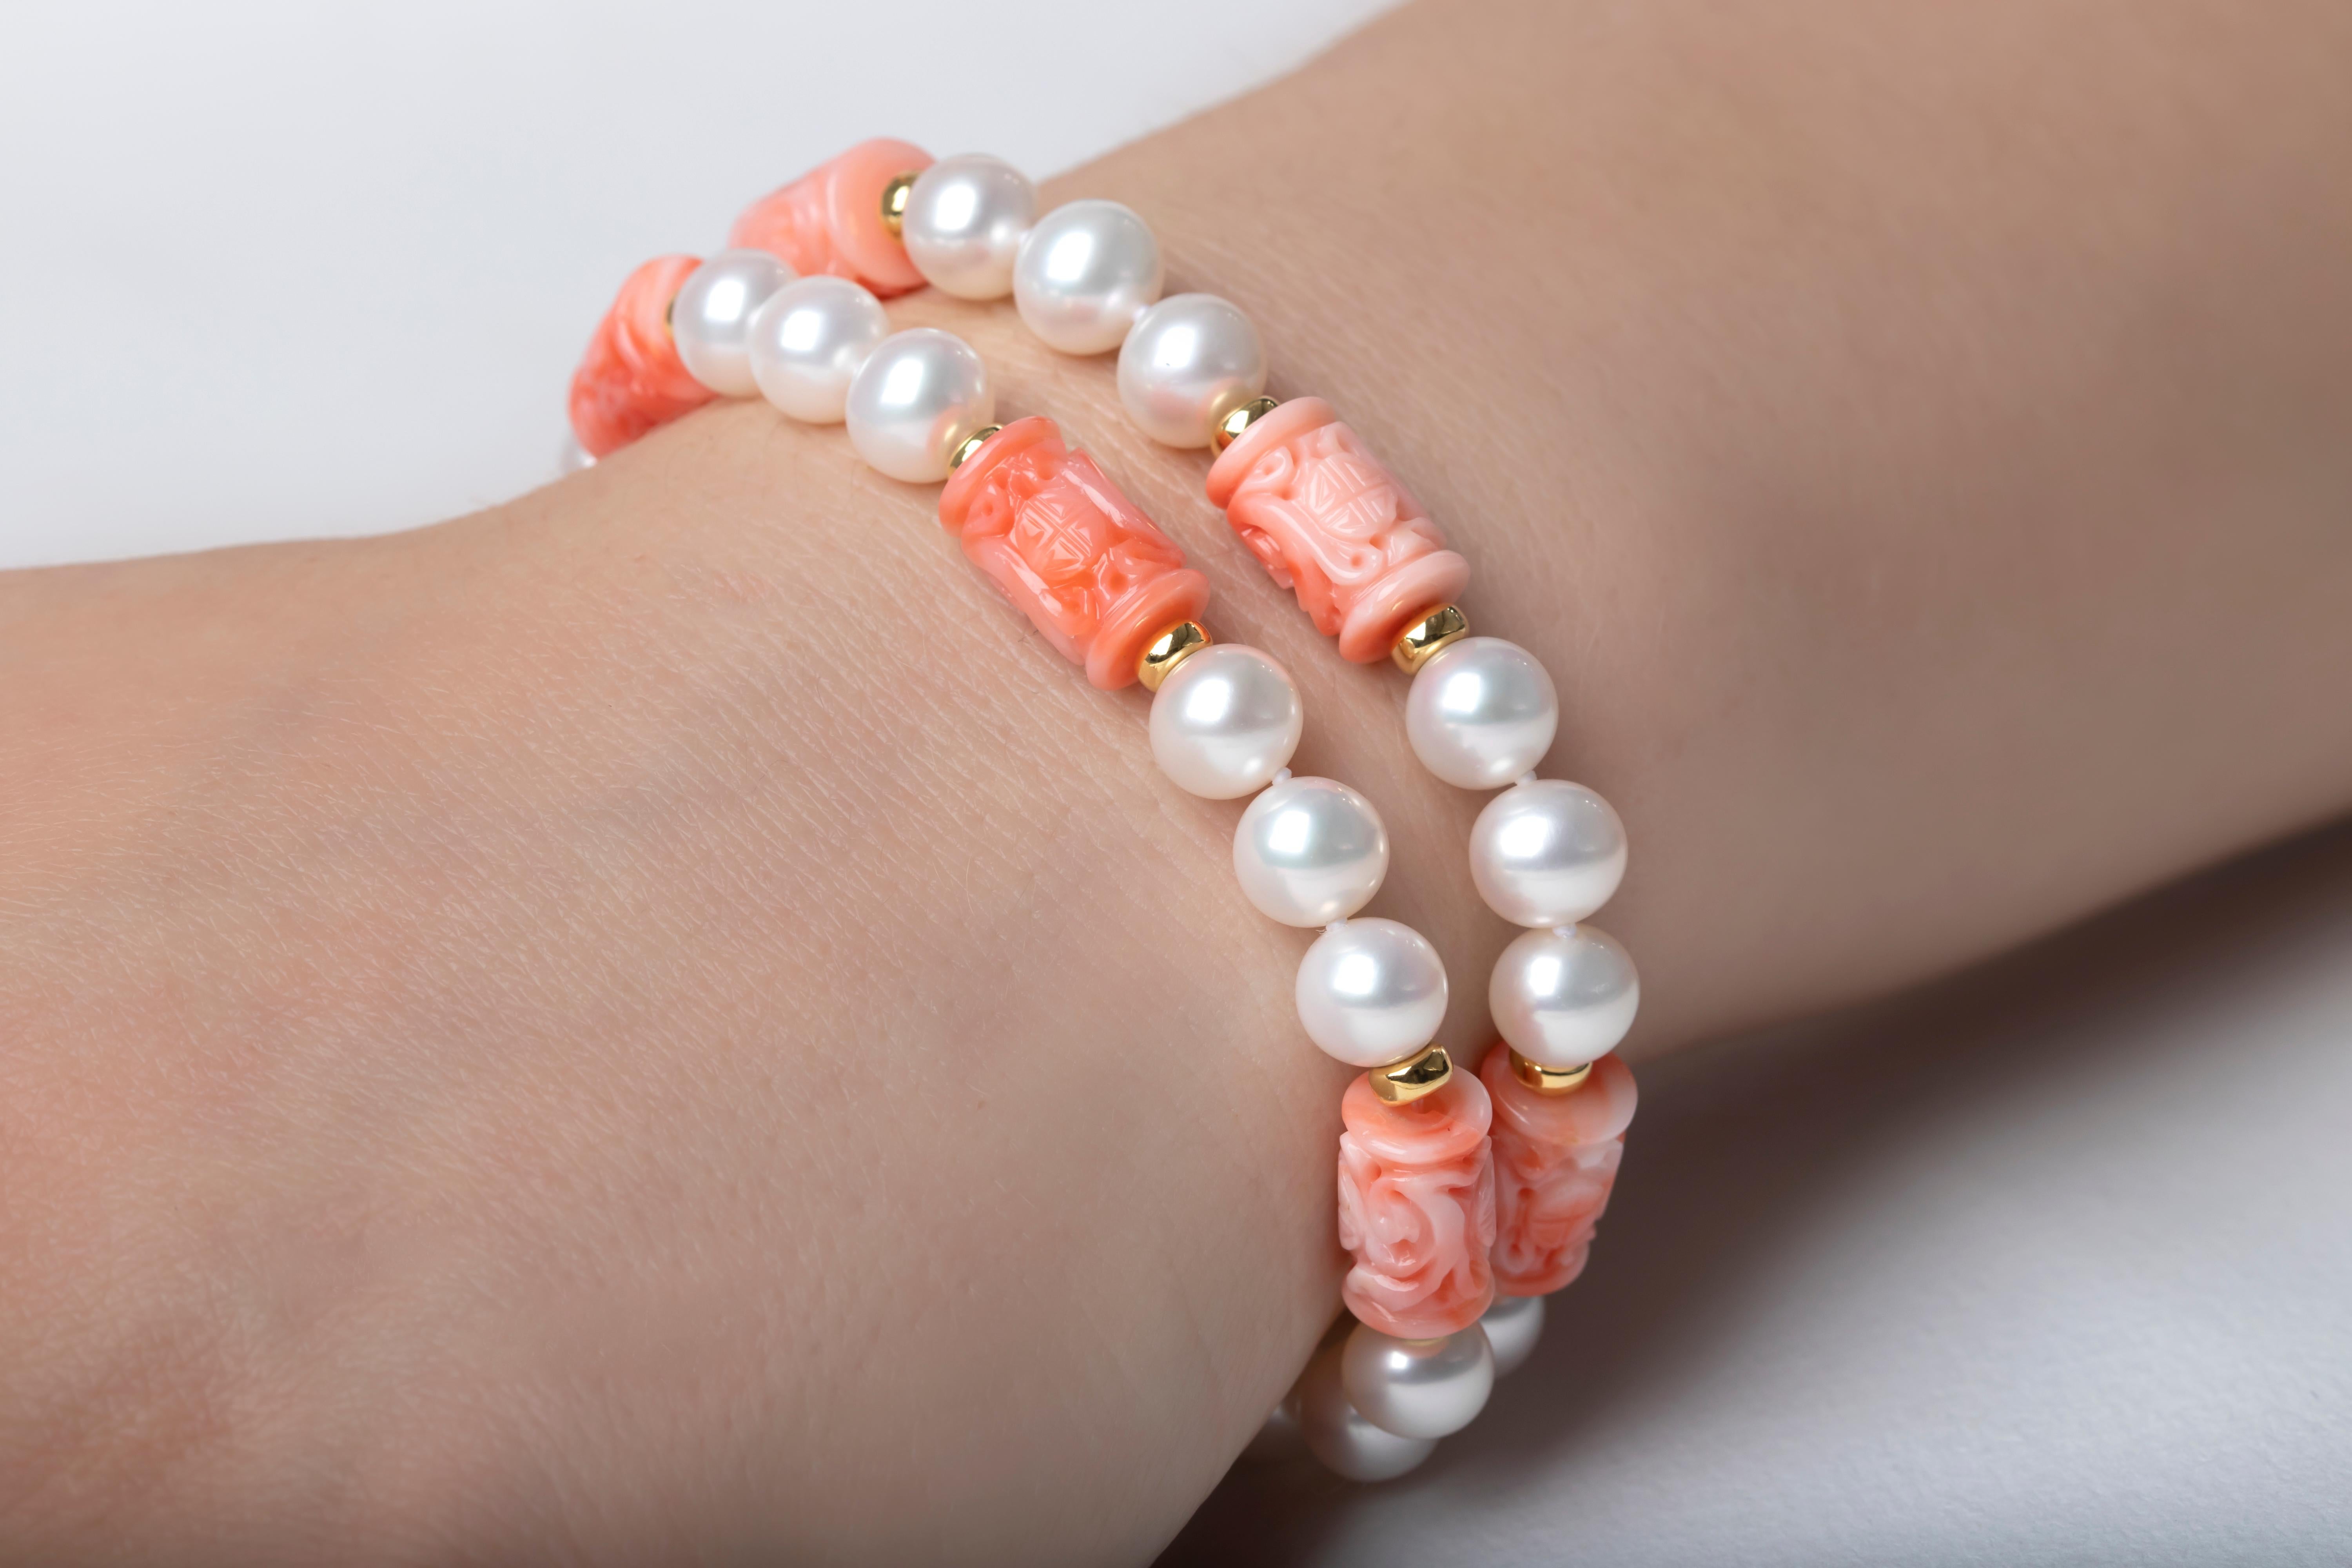 This 18K yellow gold bracelet by Yoko London features two rows of expertly matched Freshwater pearls, which are perfectly enriched by the pastel hues of the carved coral beads. The soft colours showcased in this unique bracelet make it a perfect